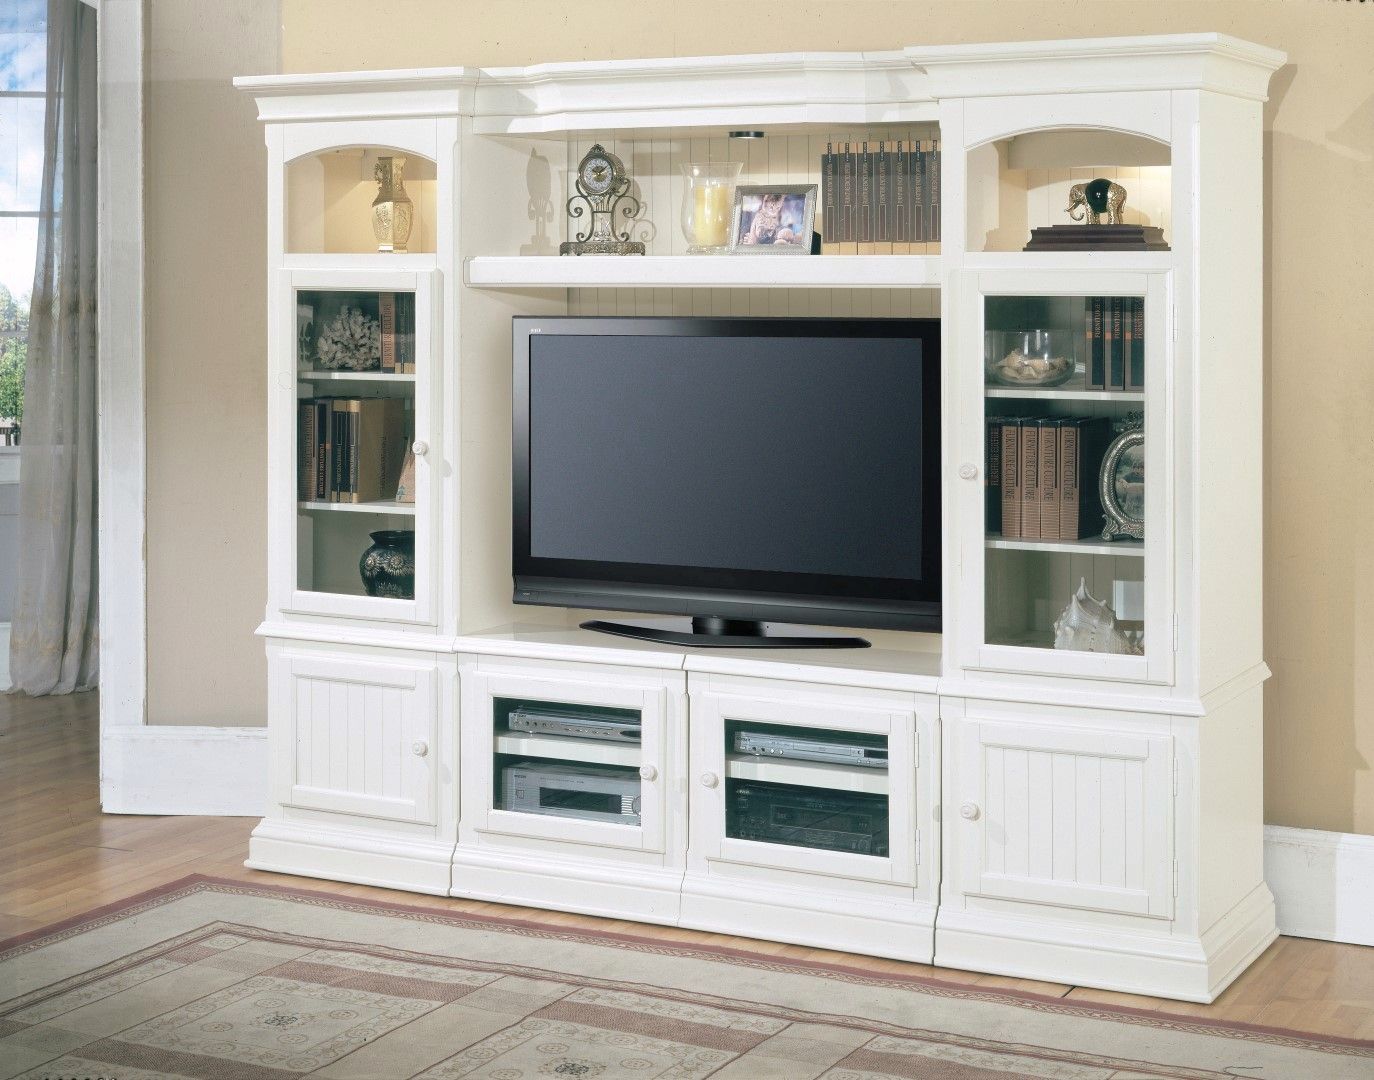 Hartford Beach Cottage 48" – 72" X Pandable Tv Media Stand Intended For Hannu Tv Media Unit White Stands (View 11 of 15)